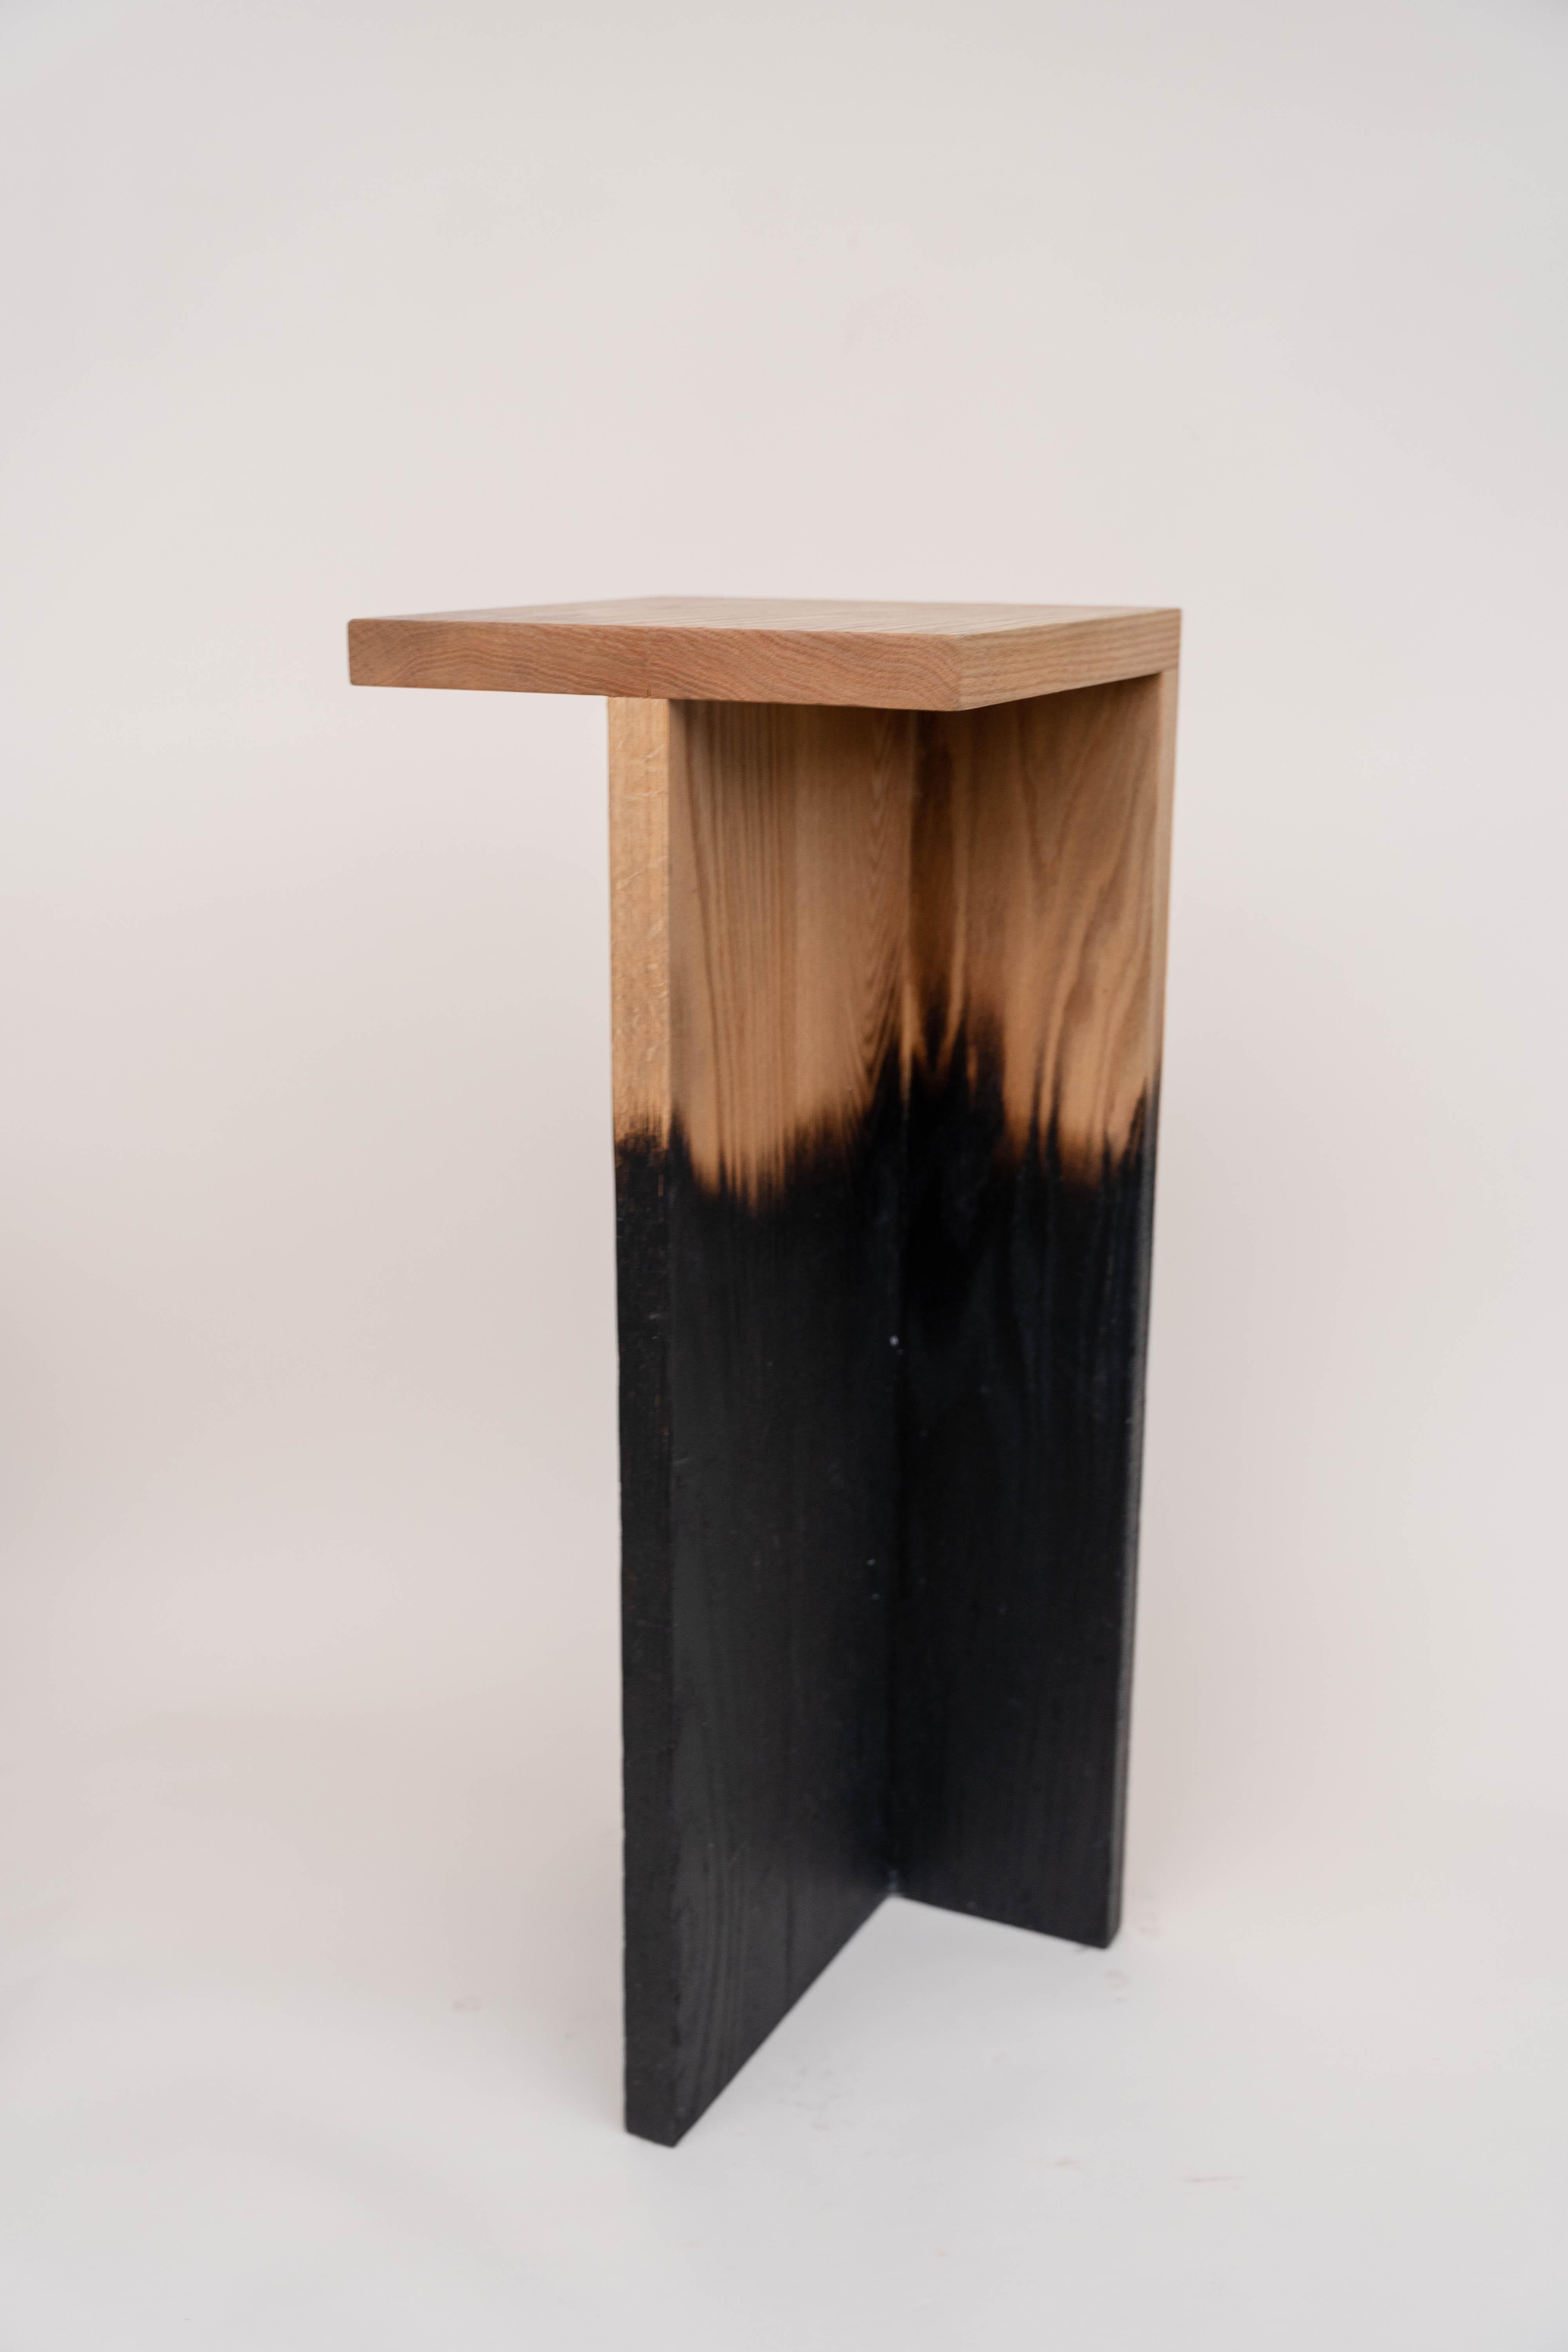 High burnt oak stool by Daniel Elkayam
Edition of 4
Dimensions: D 30 x W 30 x H 75 cm
Materials: Oak Wood

The Charred Collection
A collection of handmade wooden objects inspired by one of the most powerful natural phenomena in our world, which is